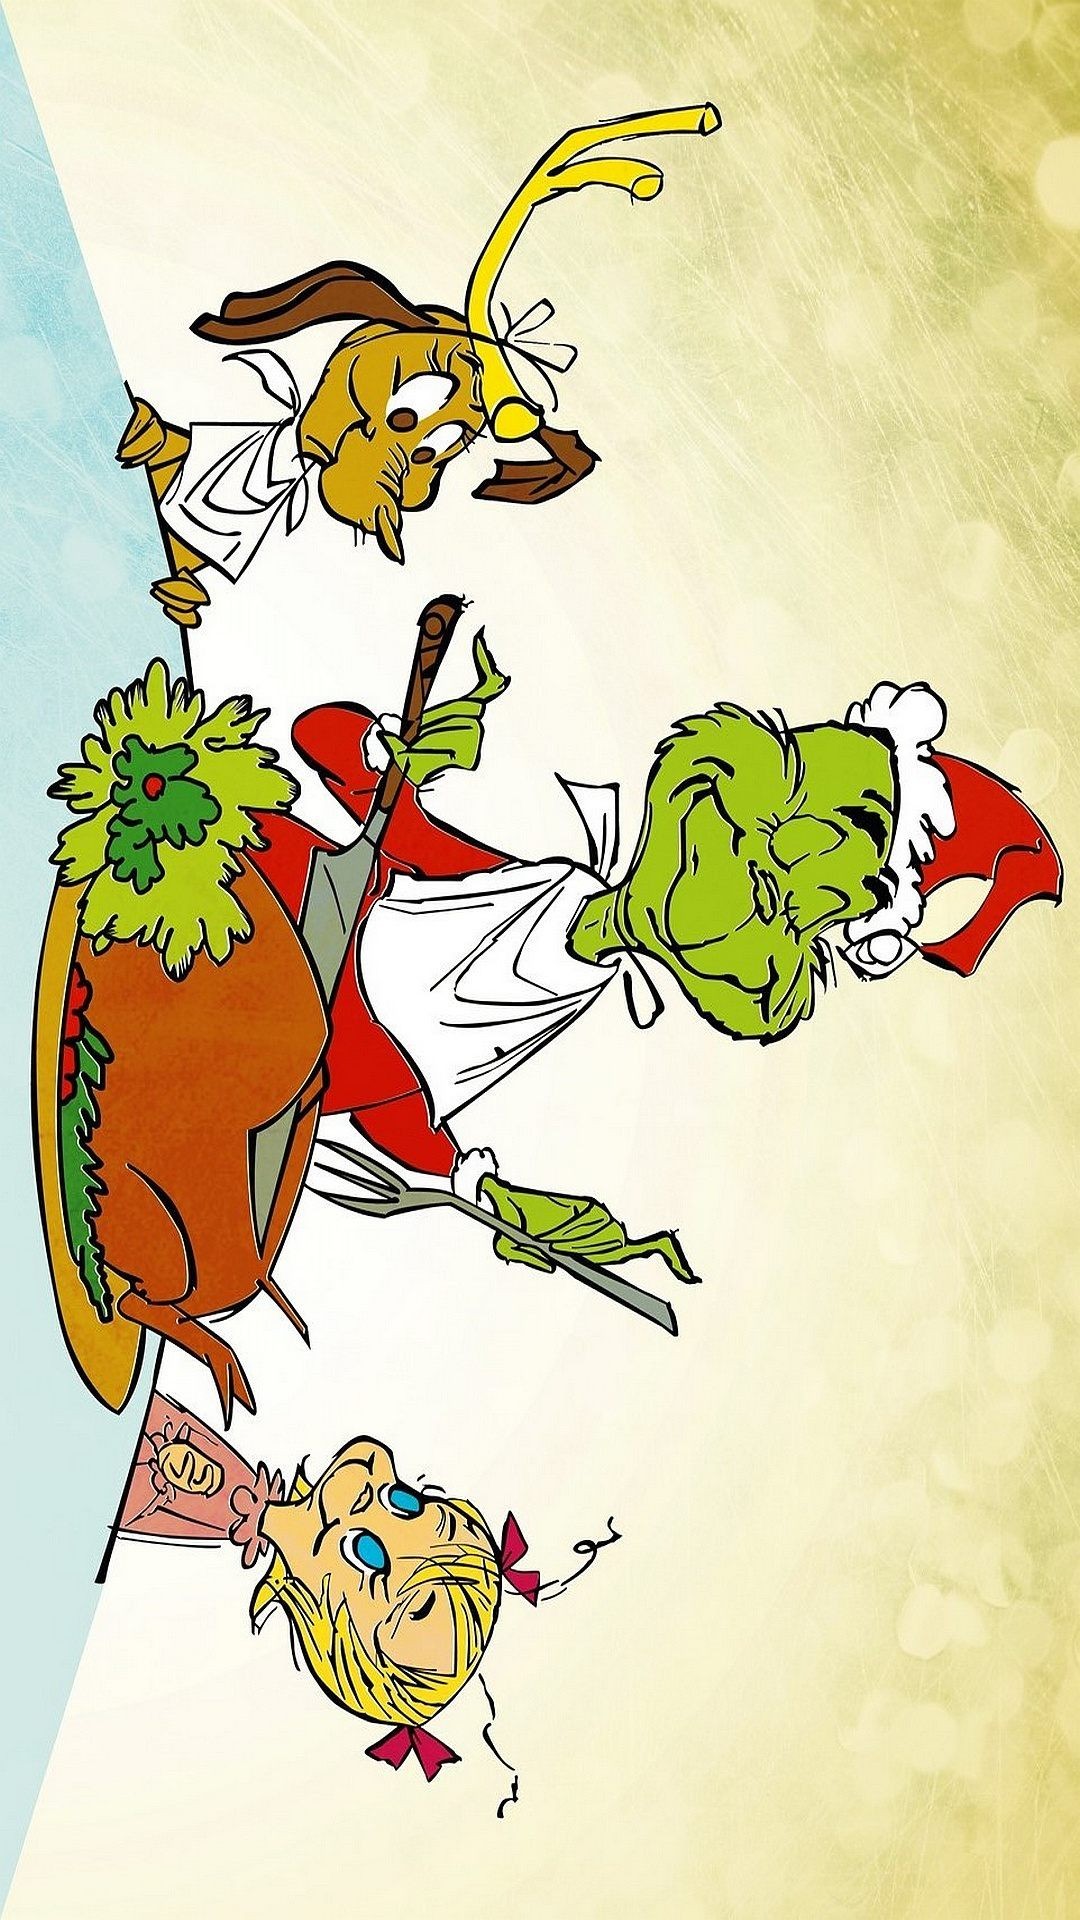 1080x1920 max the dog grinch Items - Share max the dog grinch Items - LoveItSoMuch